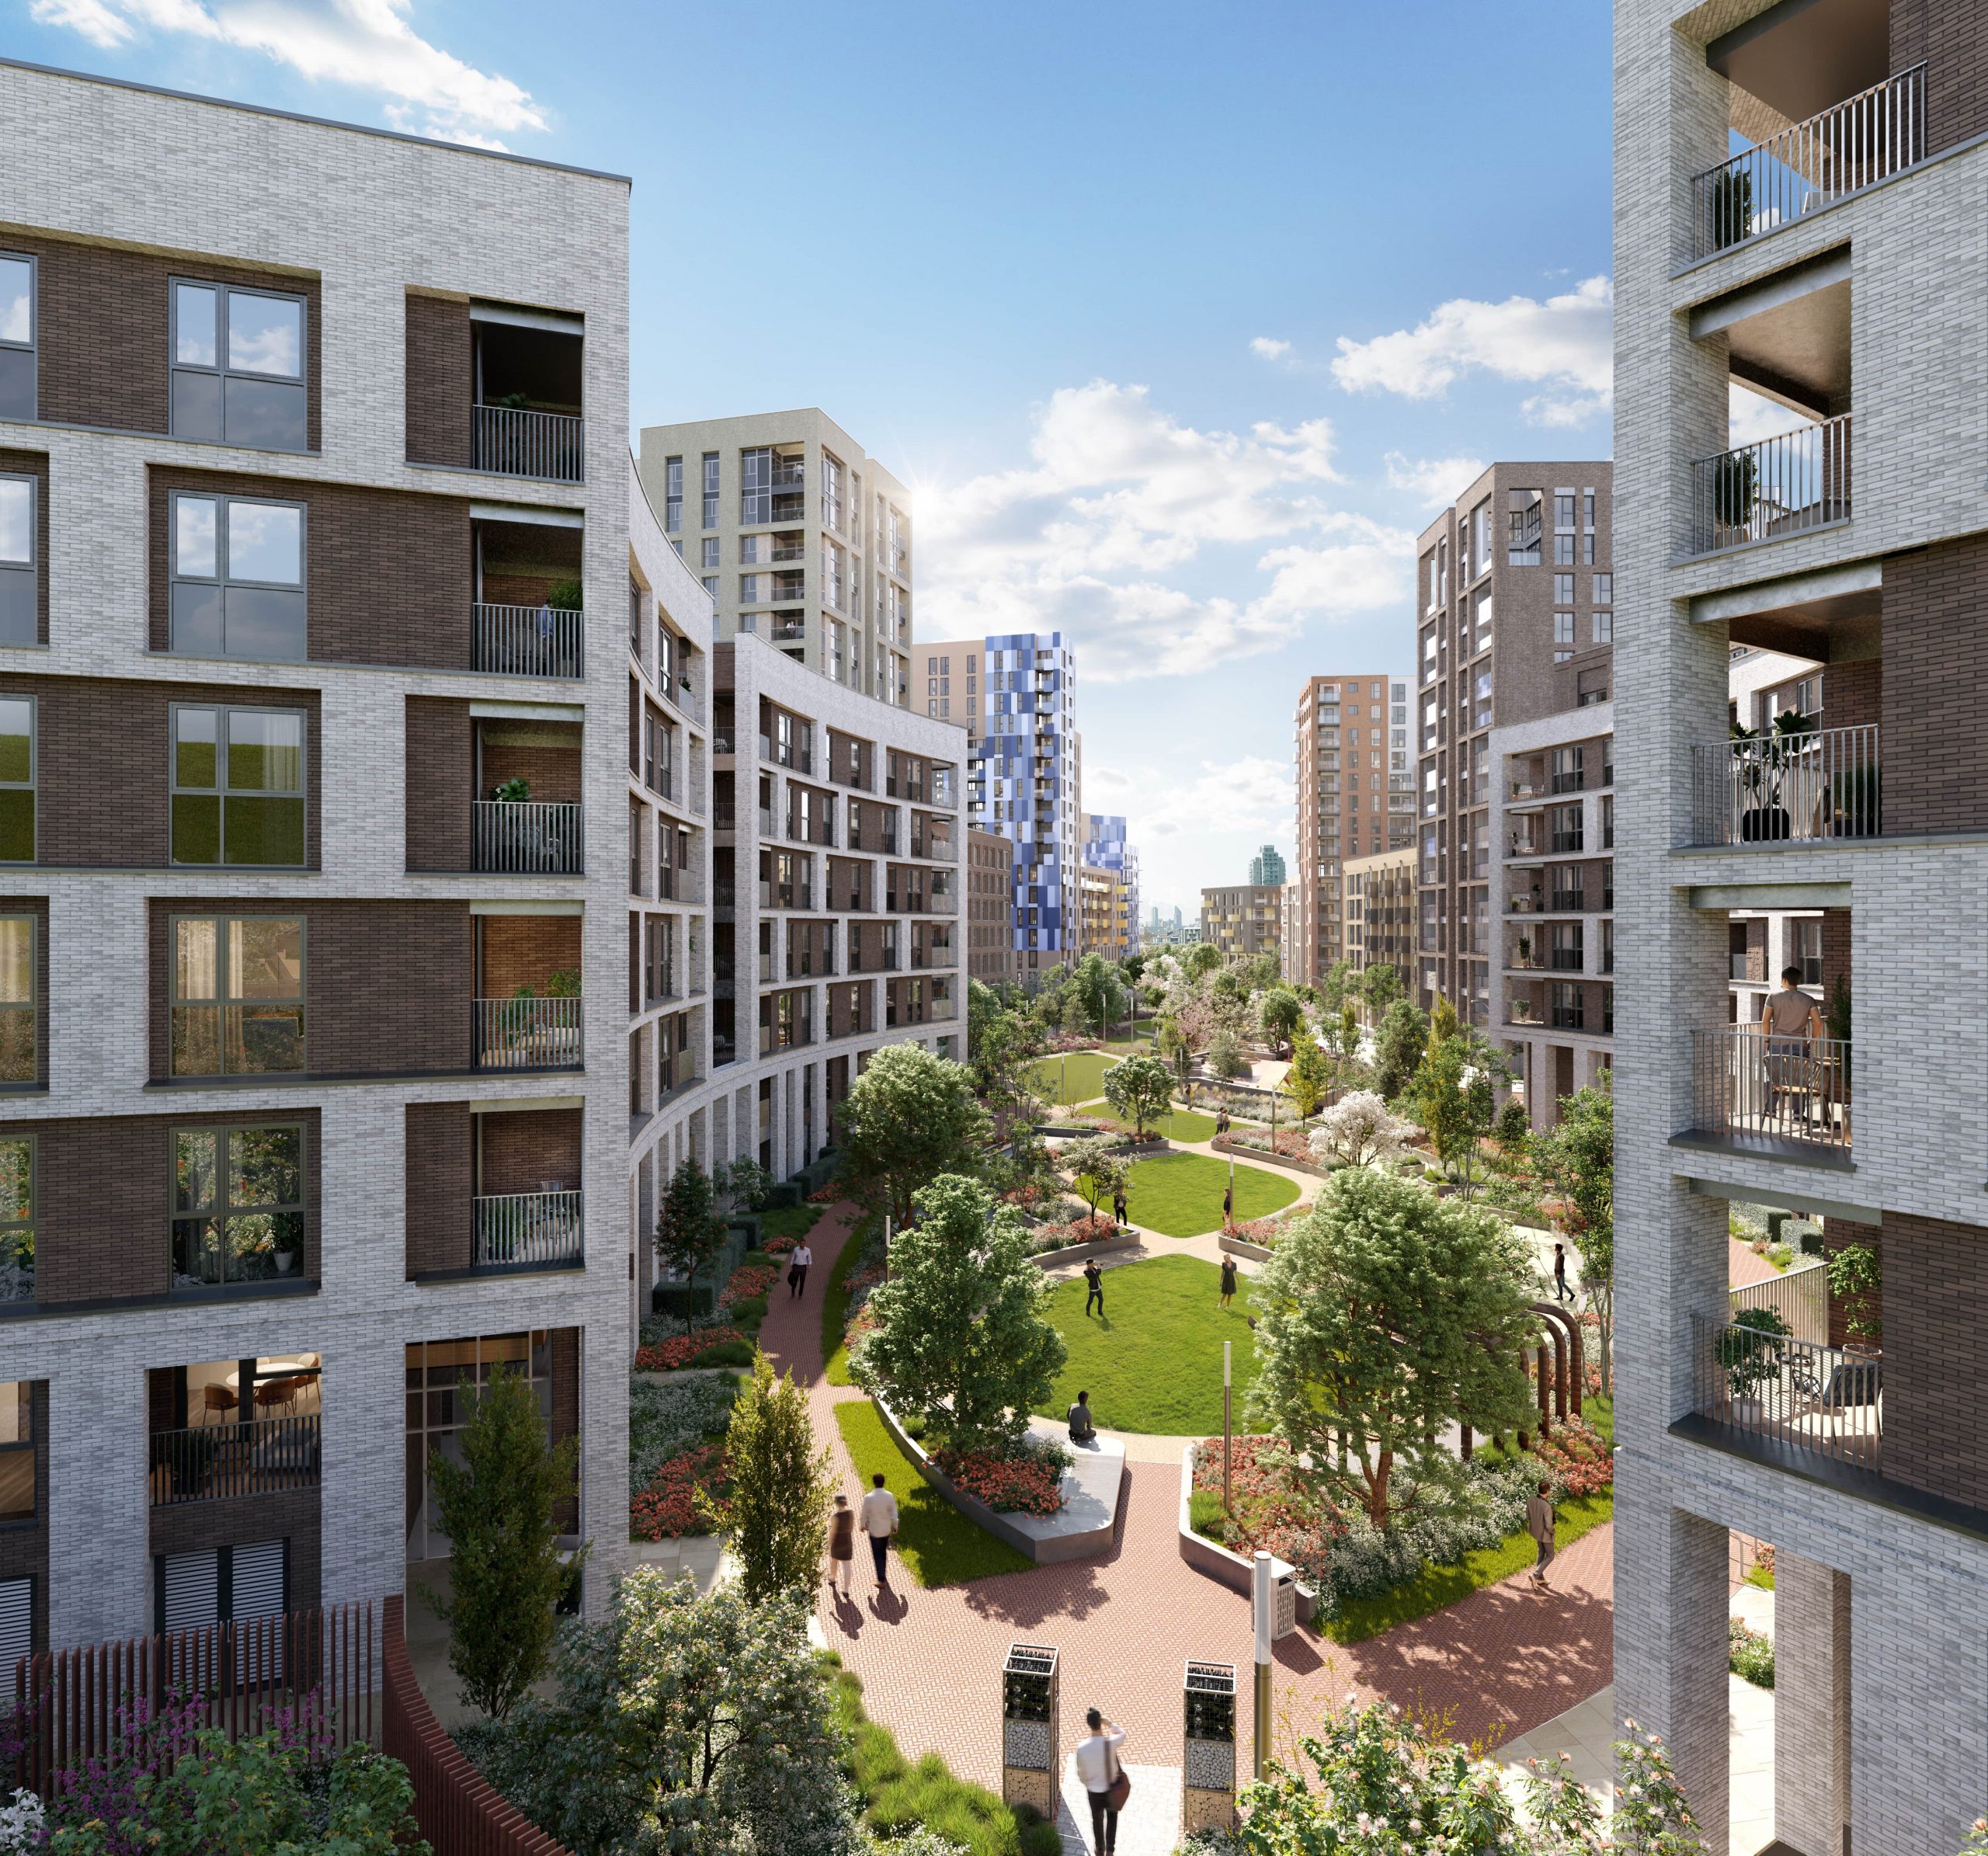 New Lewisham Homes Are The Final Chapter In The Heathside & Lethbridge Regeneration